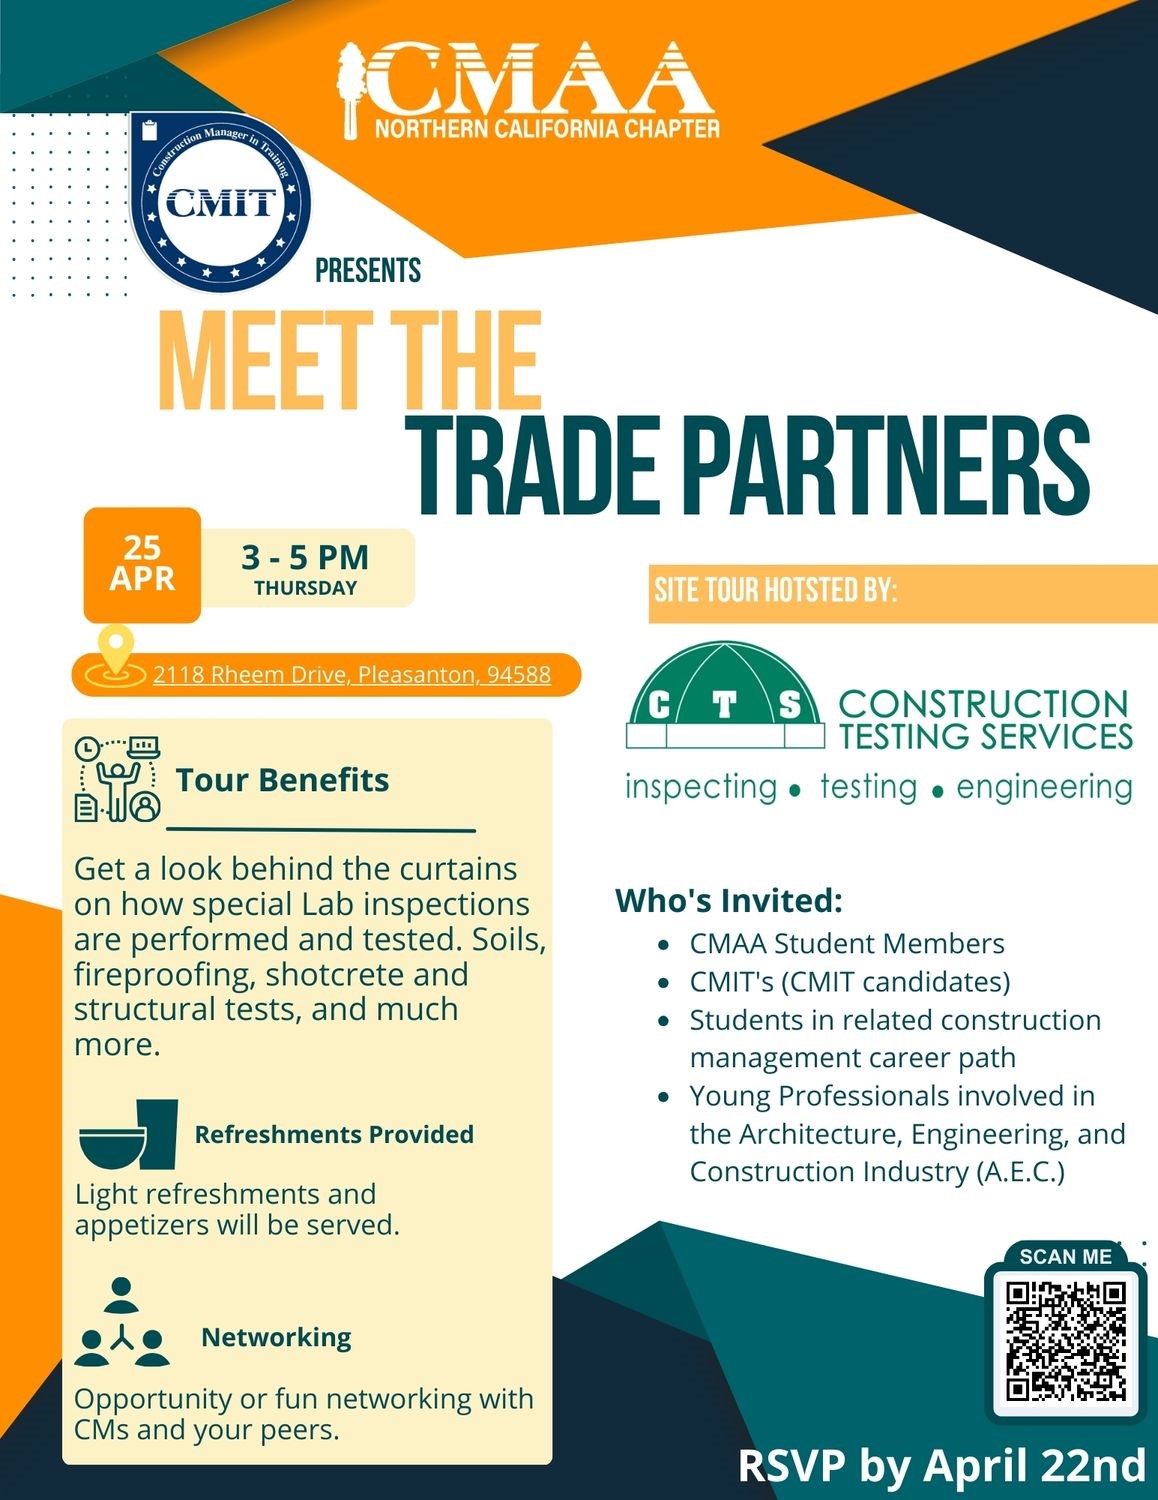 Construction Management Association of America's Meet the Trade Partners Event